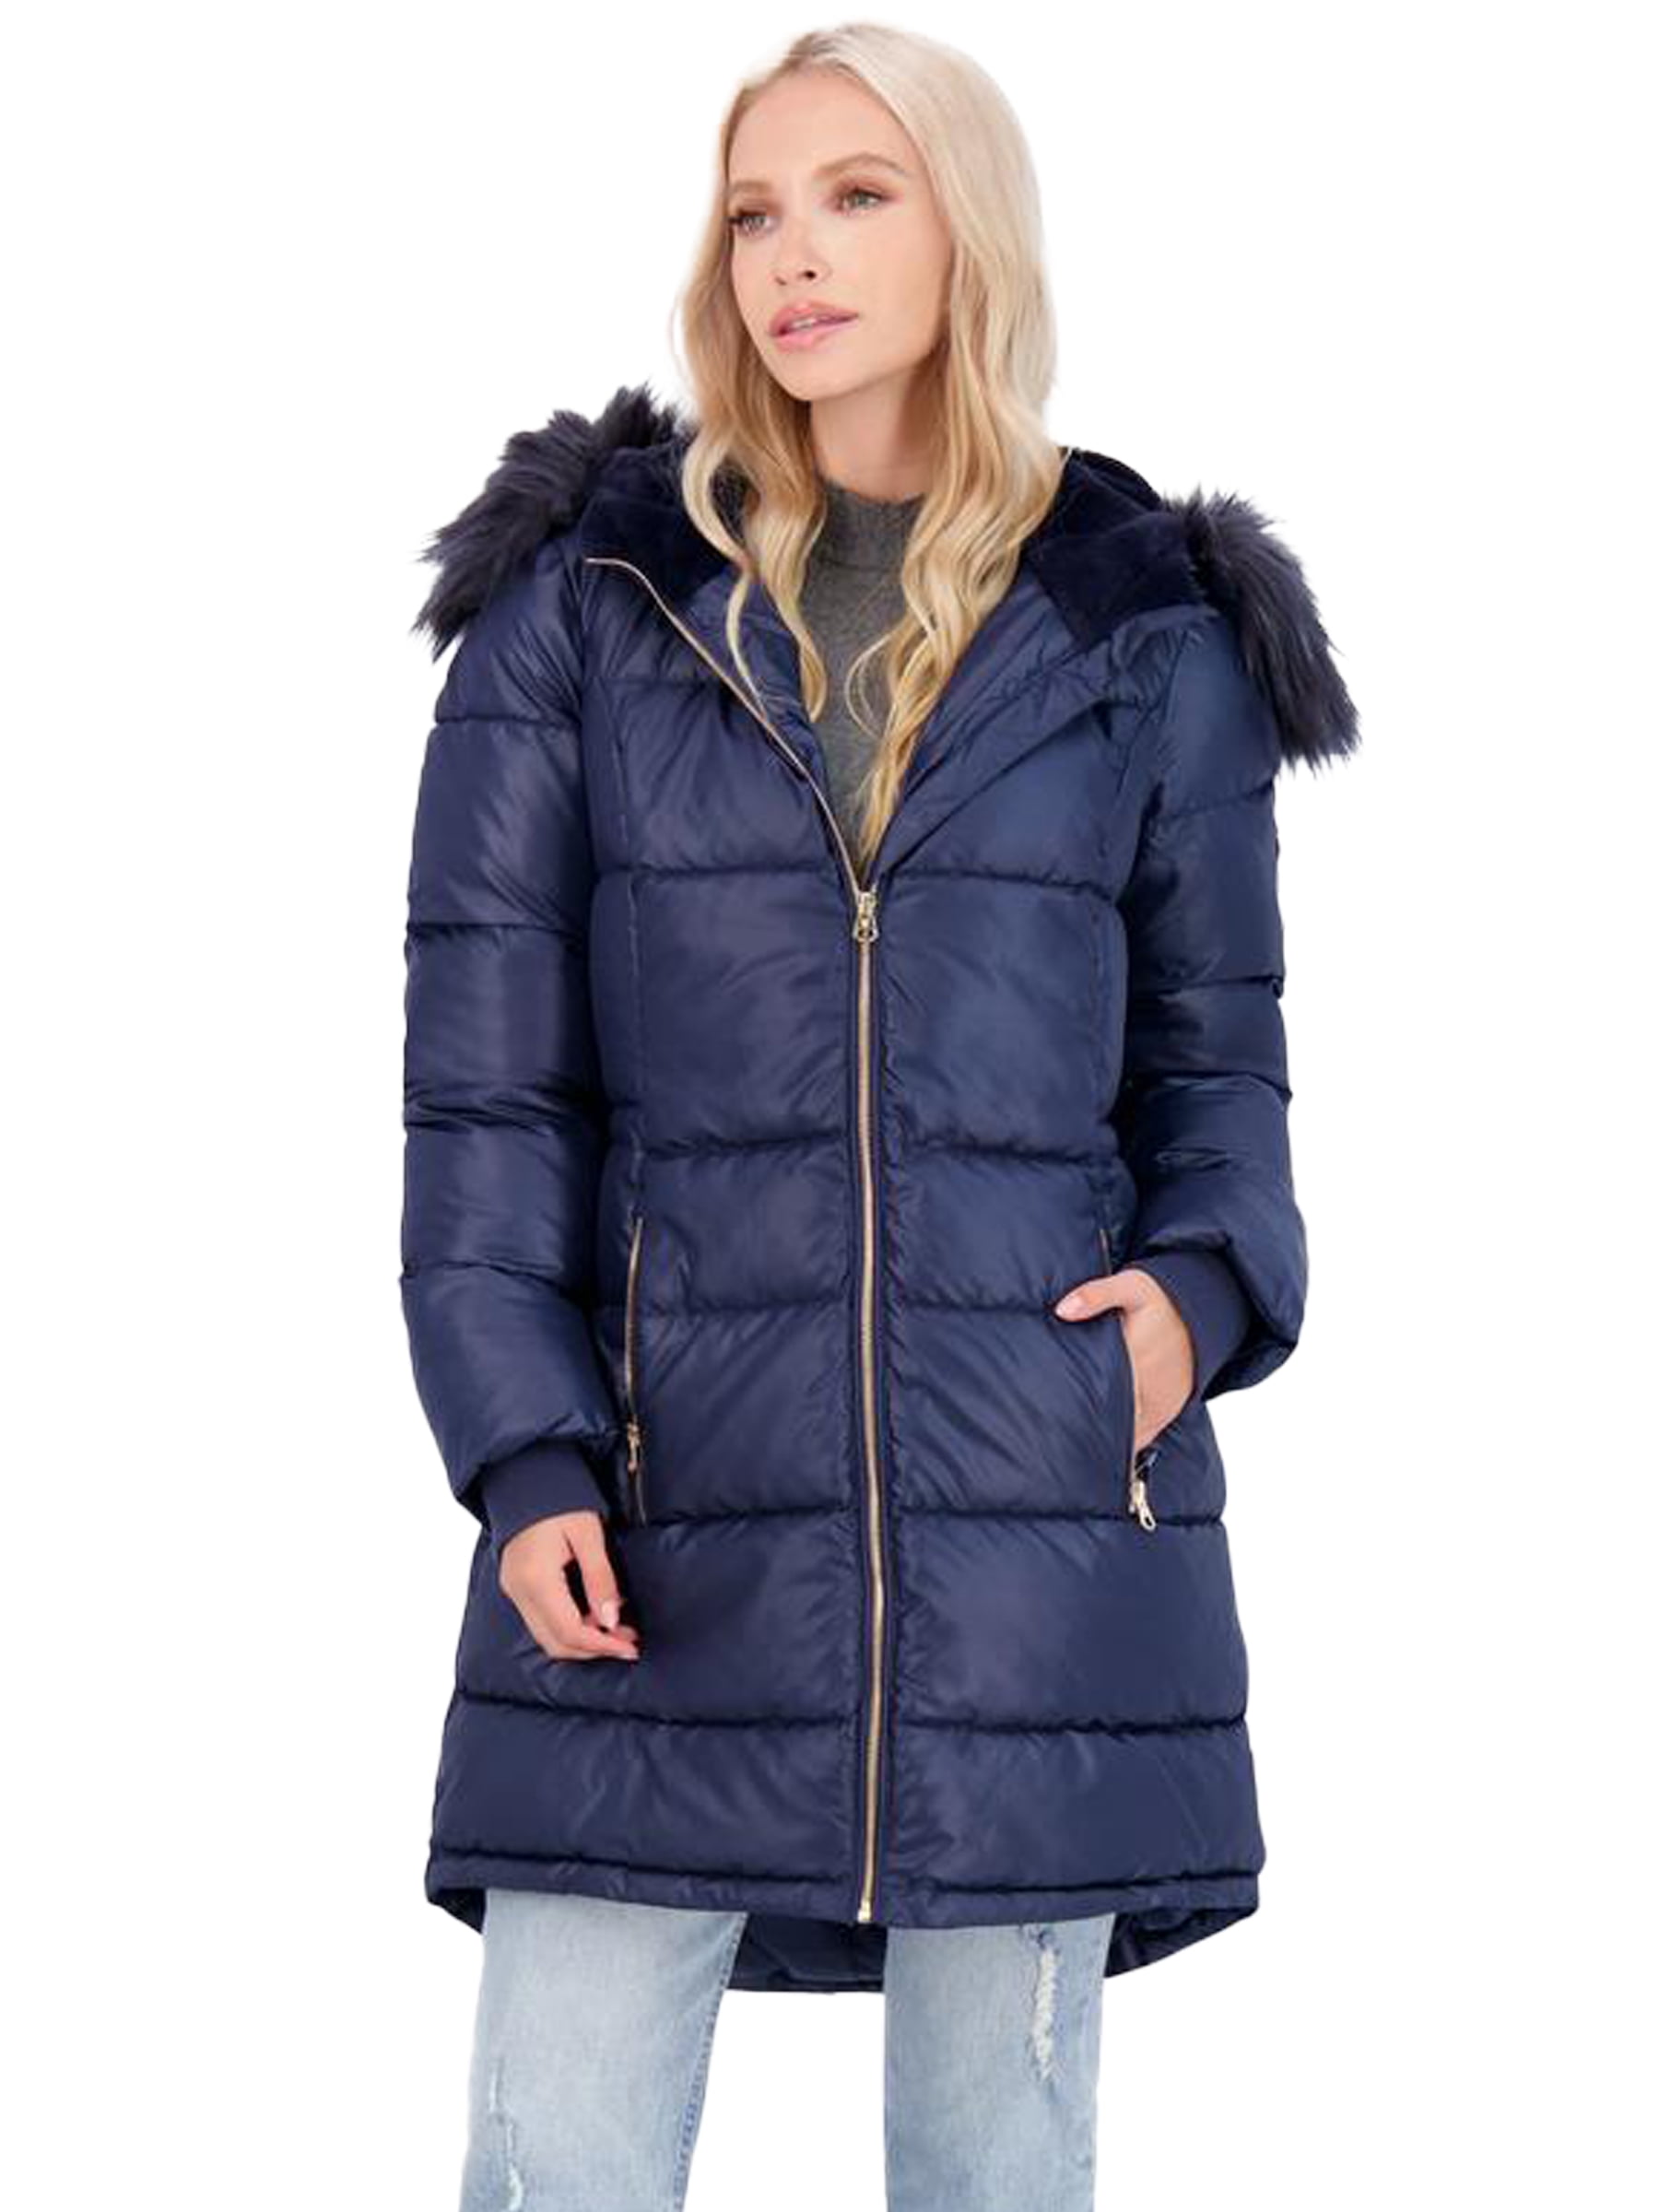 Jessica Simpson Puffer Coat For Women - Quilted Winter Coat w/ Faux Fur ...